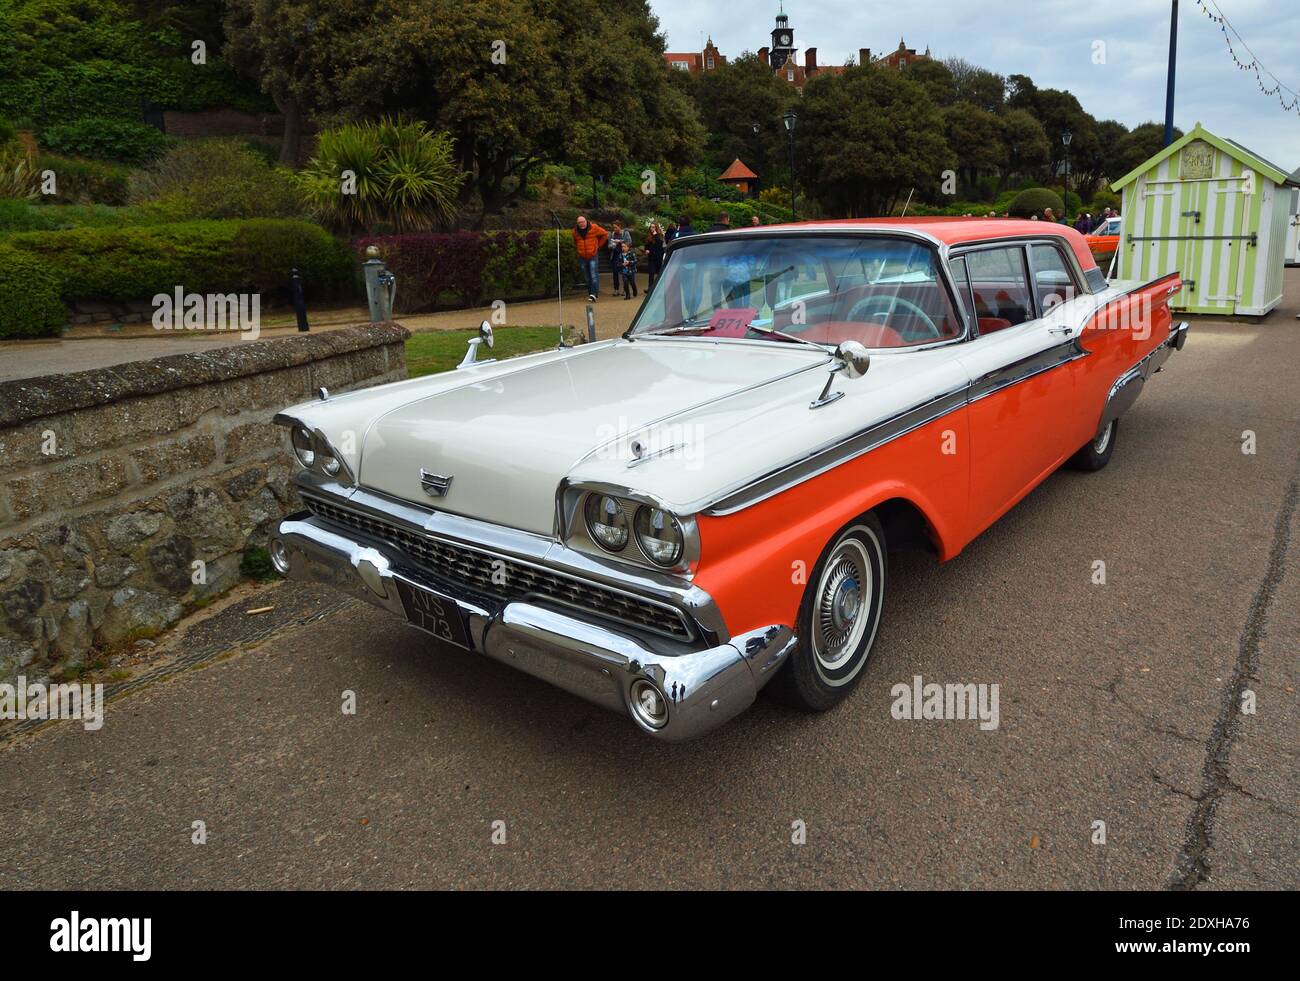 Classic American Ford Galaxie automobile parked in front of trees. Stock Photo